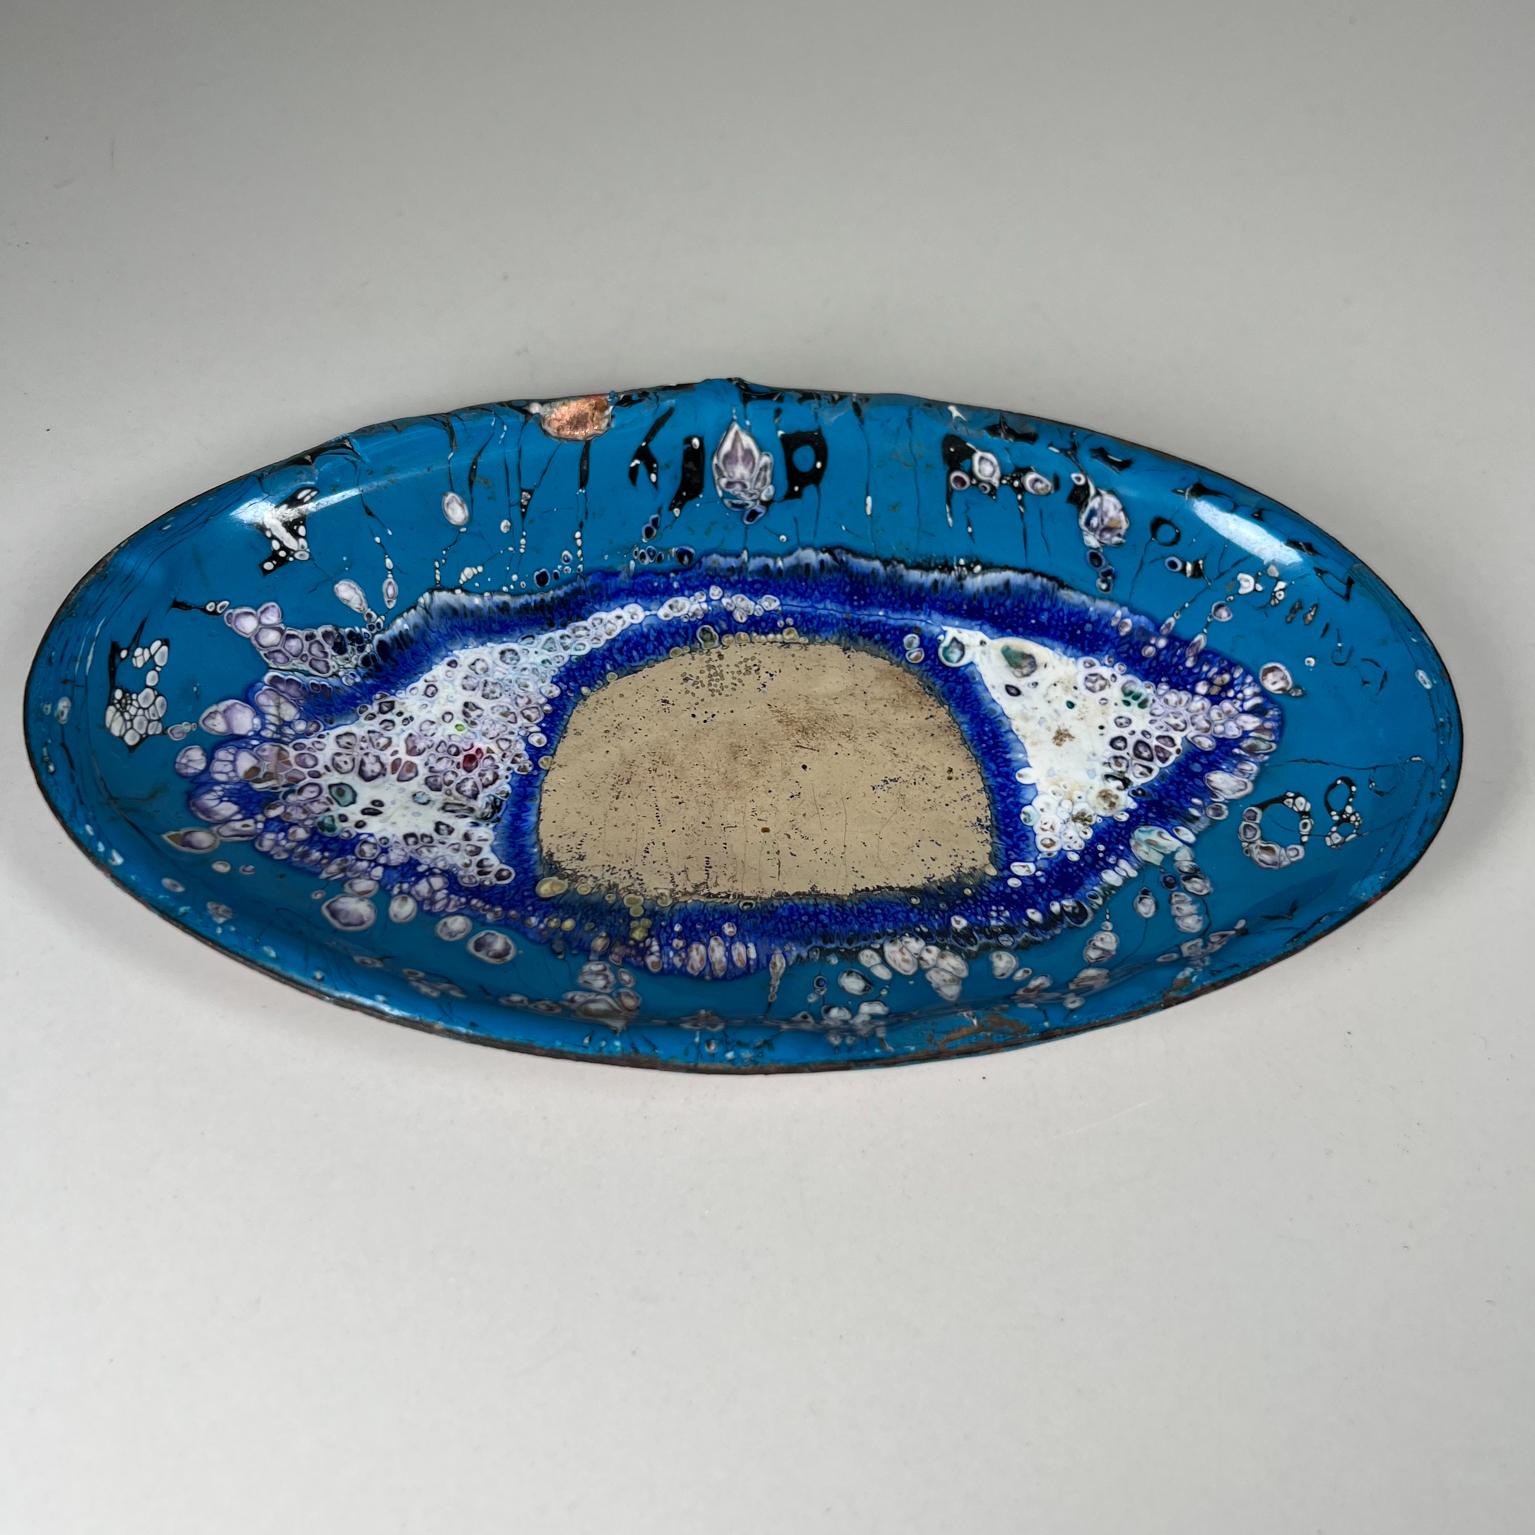 Graphic Joy Fusion Art blue Enamel peace plate
Oval shape and written words.
7.63 w x 4.63 d x .63 tall
Preowned vintage condition
See images provided.
 